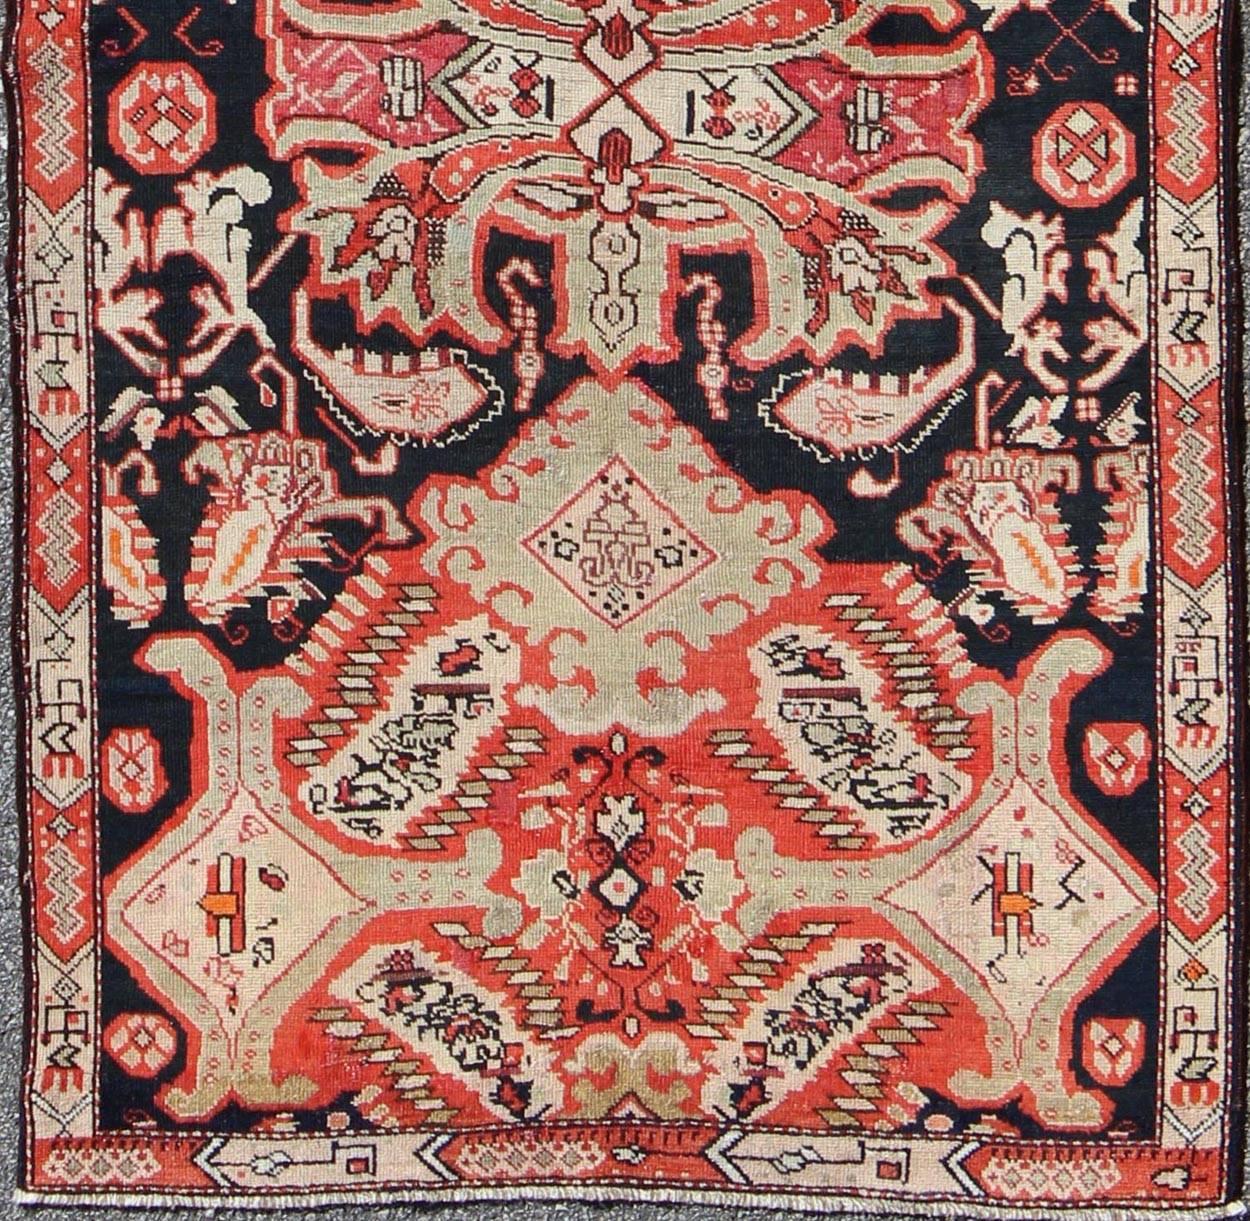 Antique Caucasian Karabagh Runner in Black Background, Orange, Green & Salmon.
This beautiful antique Karabagh displays an unusual multi-medallion design. The background is dark brown, while other colors include orange, light green and cream.